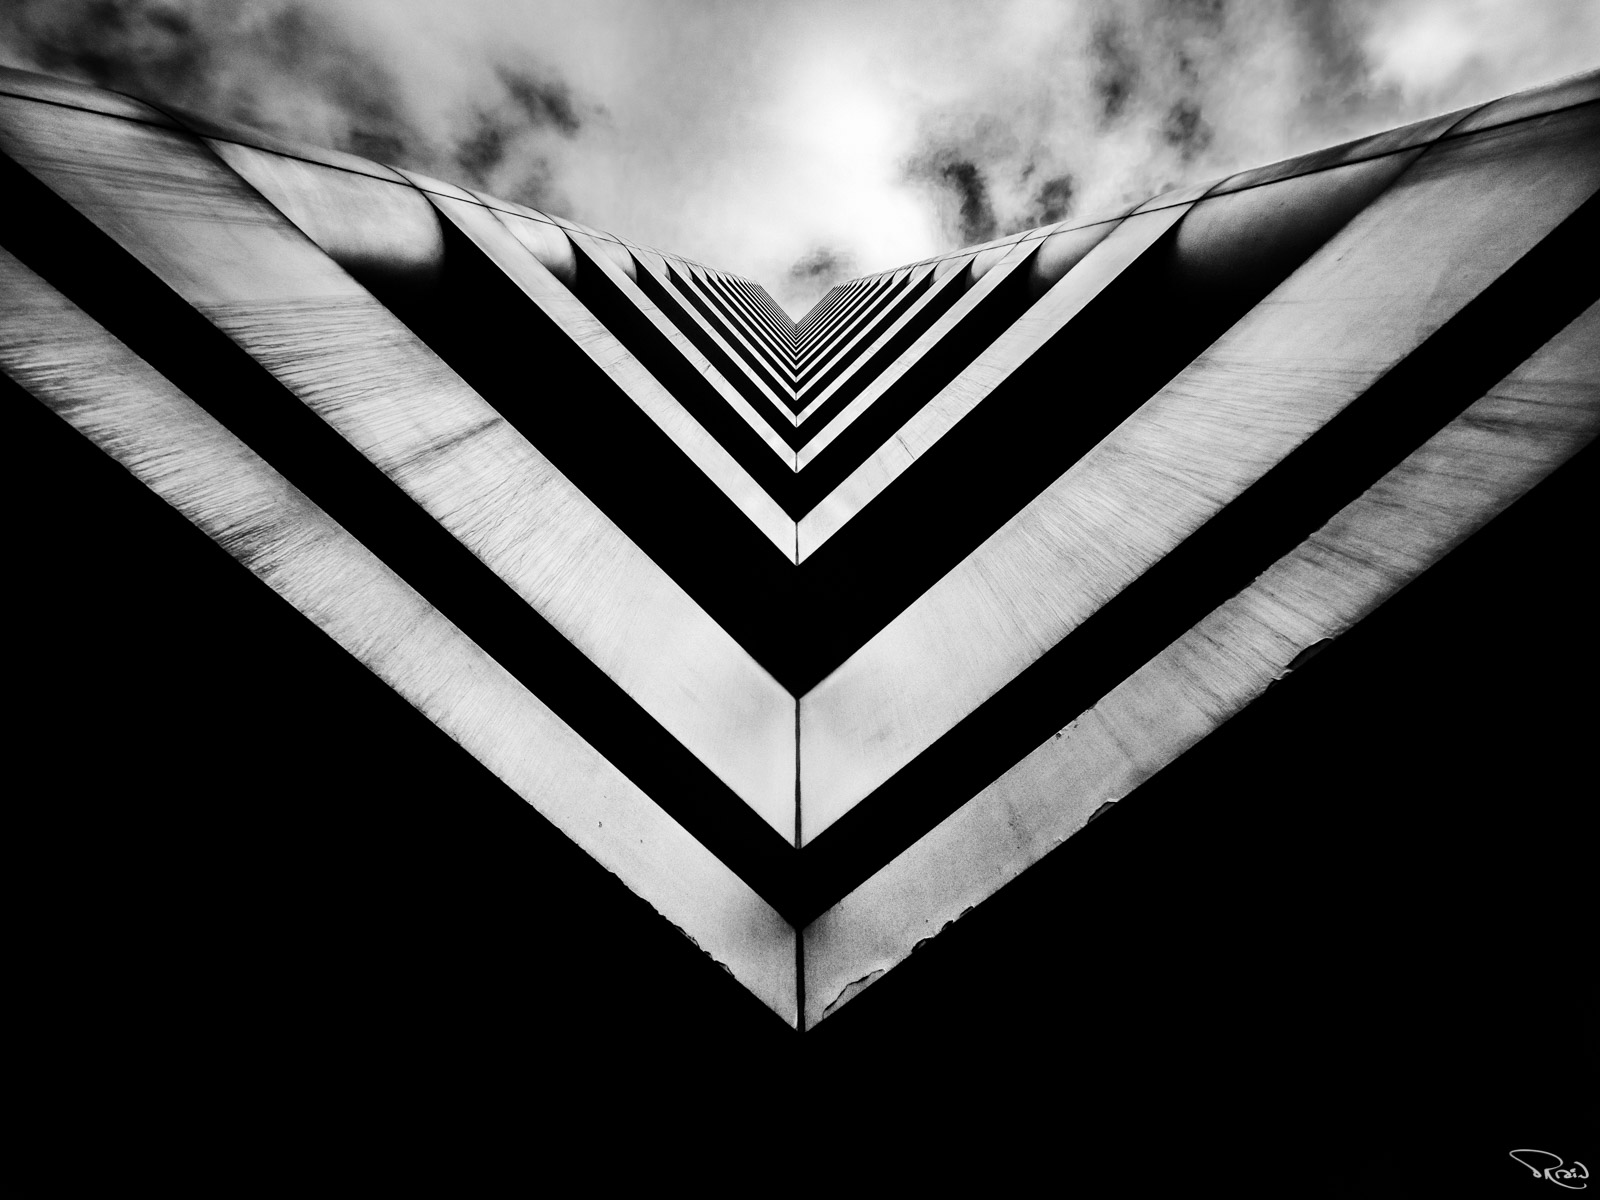 Looking up at a black-and-white skyscraper shaped like a series of deep V angles moving off into the distance.